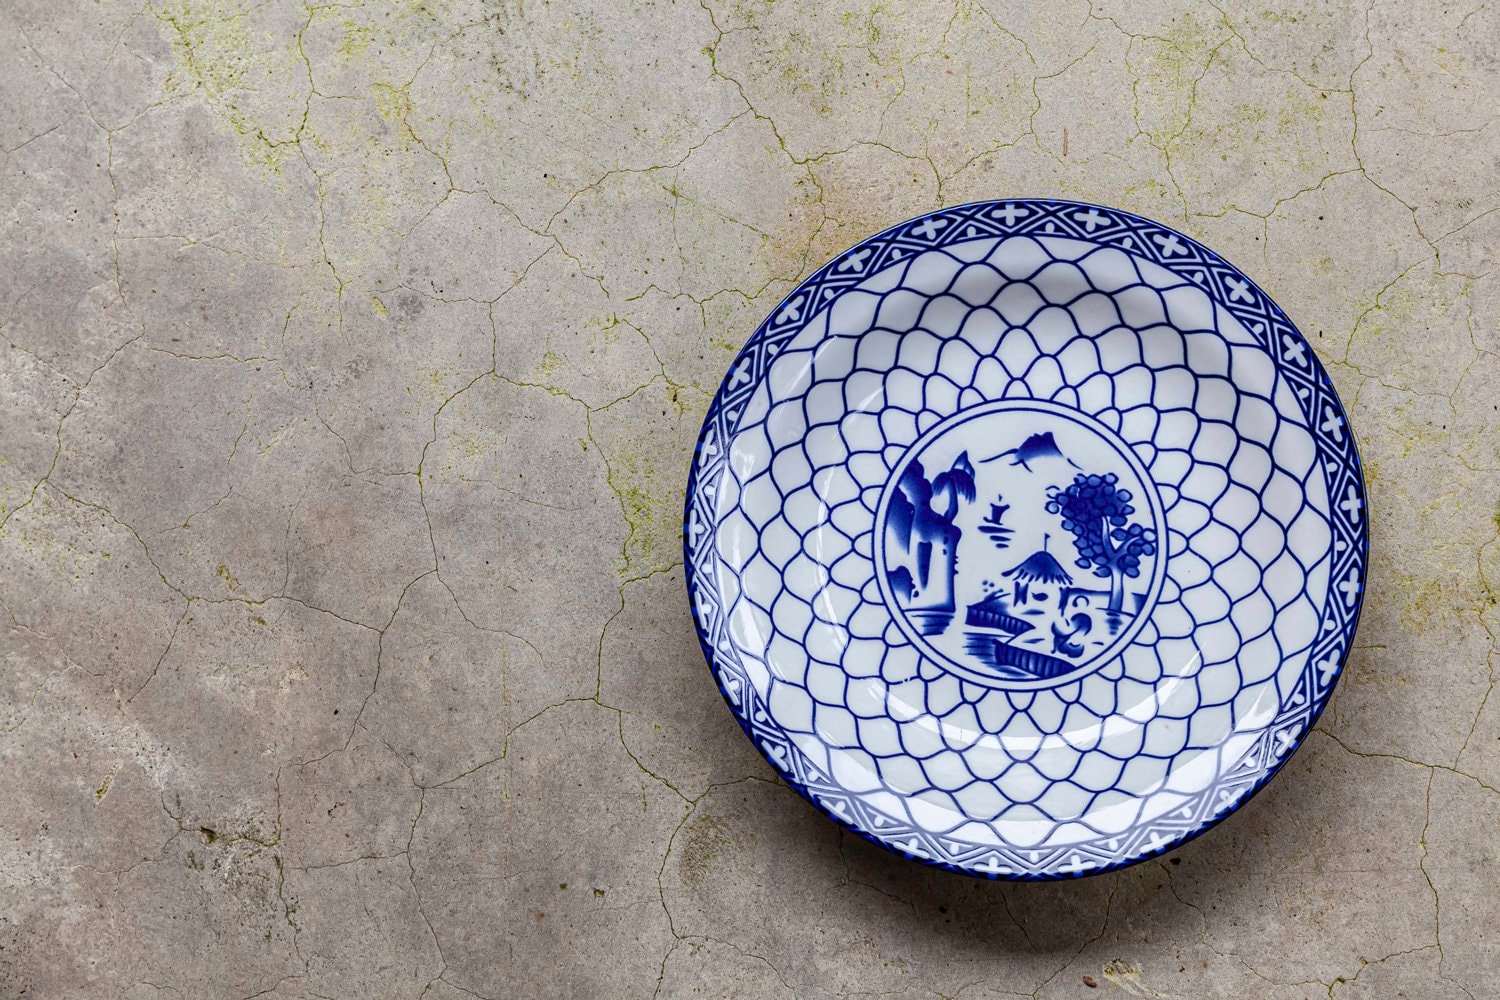 Blue and white patterned plates on the stone table